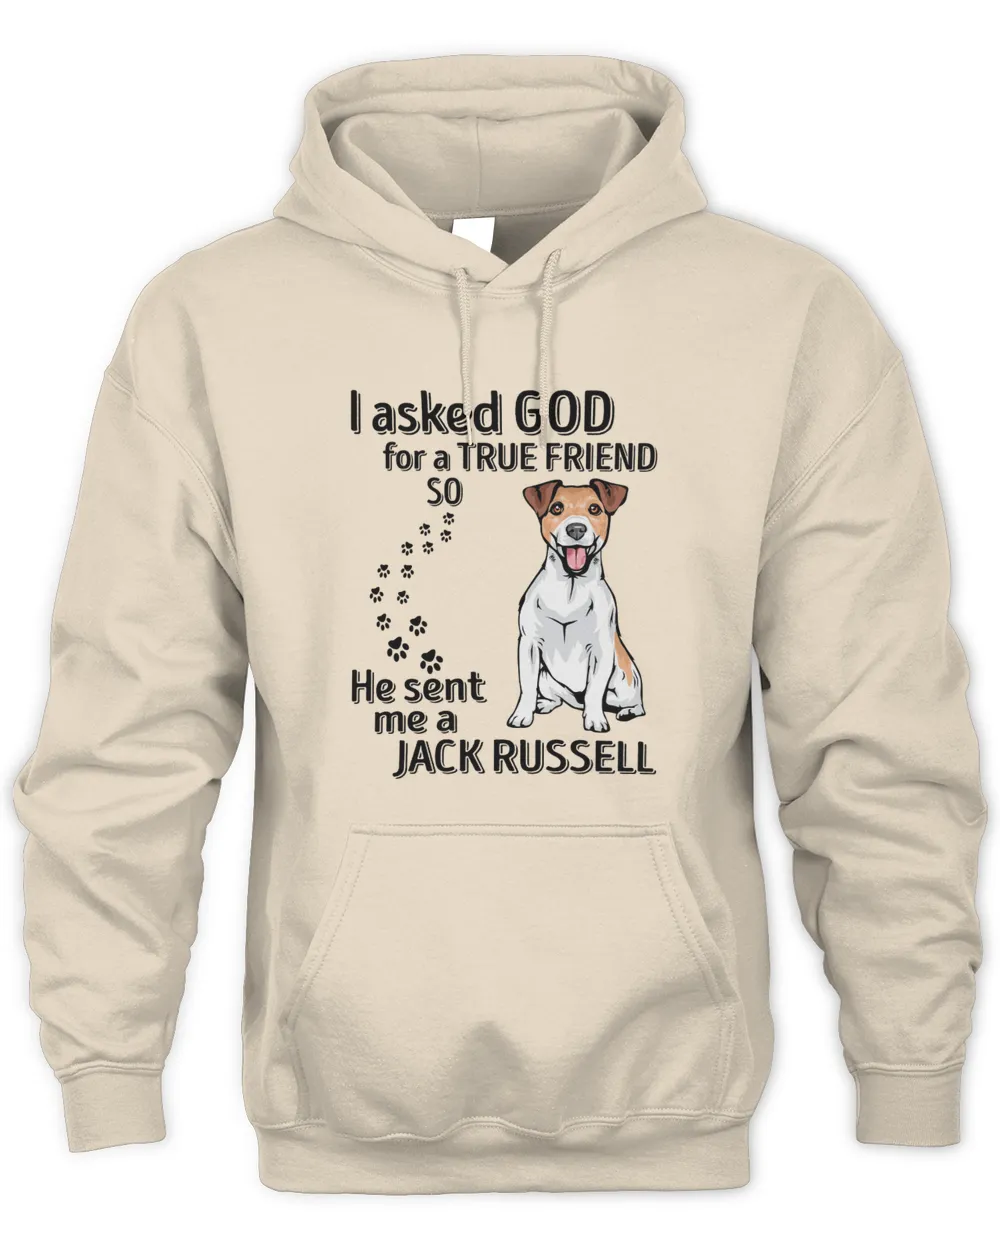 He sent me a Jack Russell